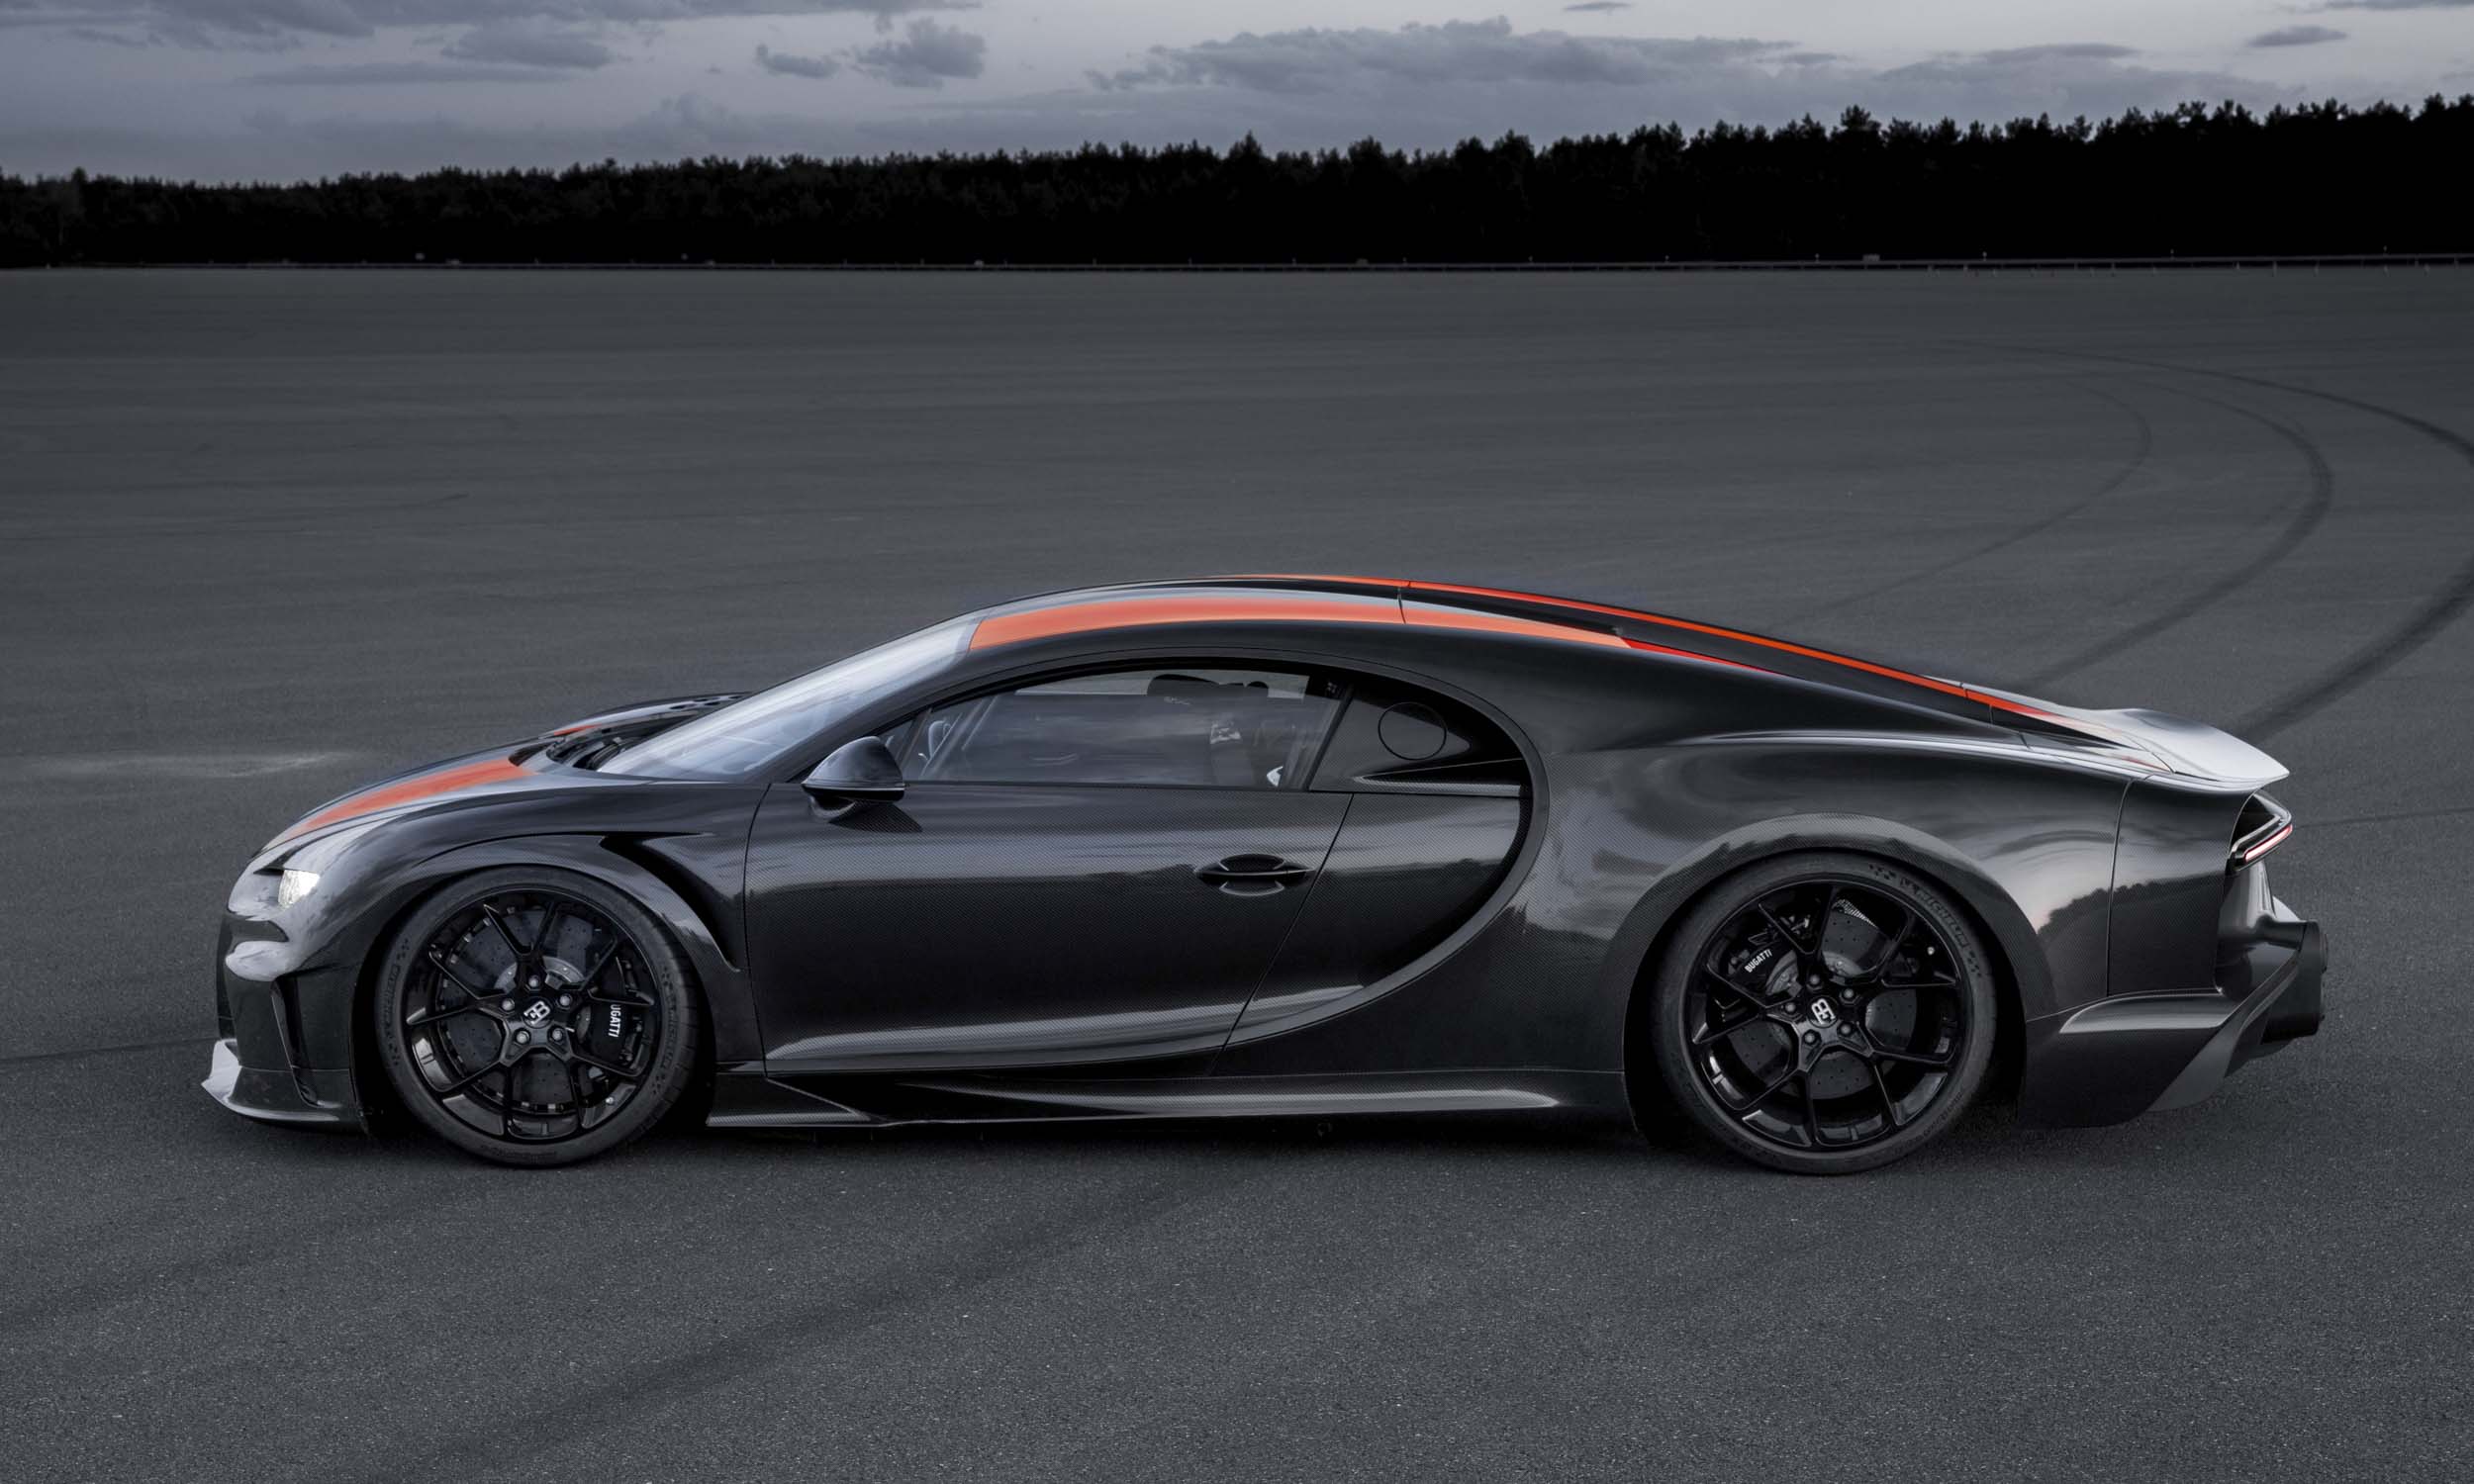 <p>          To commemorate this high-speed achievement, Bugatti created a limited number of Chiron Super Sport 300+ models that mimicked the style of the record-setting model, including exposed Jet Black carbon fiber with Jet Orange racing stripes. This special Chiron also received a power boost, putting out 1,600 horsepower. However, in the interest of safety, speed was limited to “just” 273 mph.         </p>